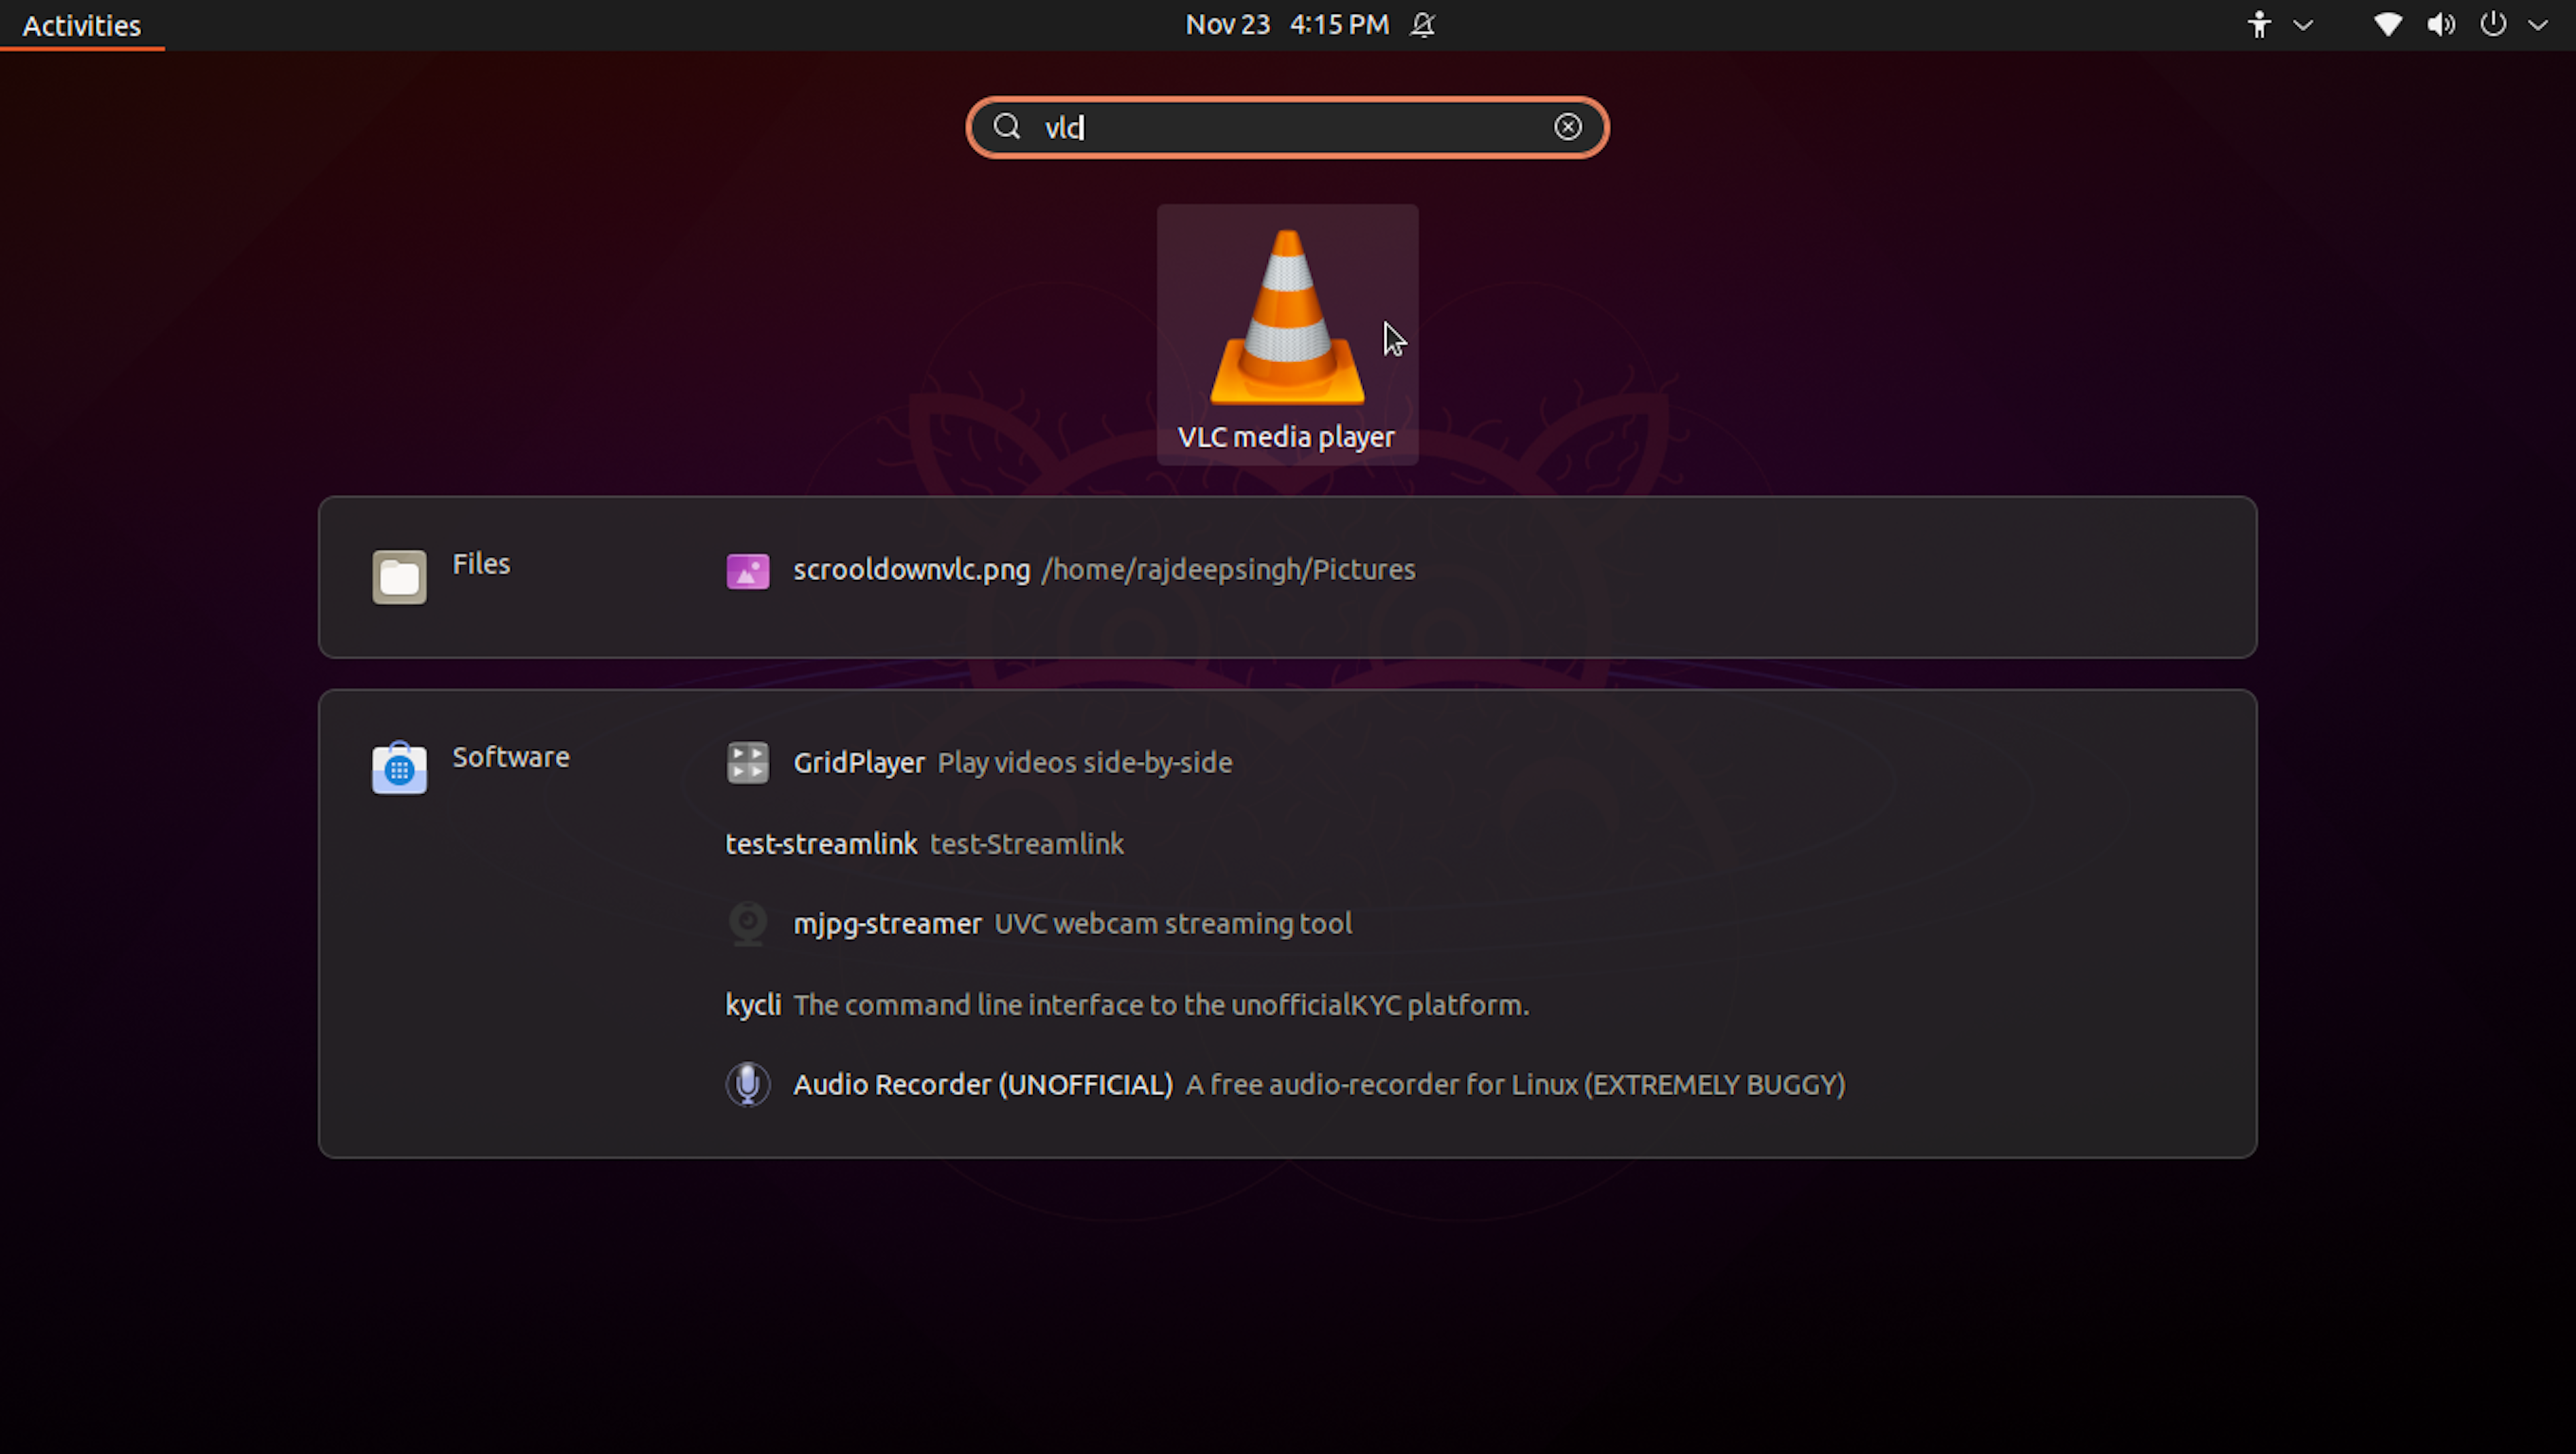 Search the VLC media player and open it